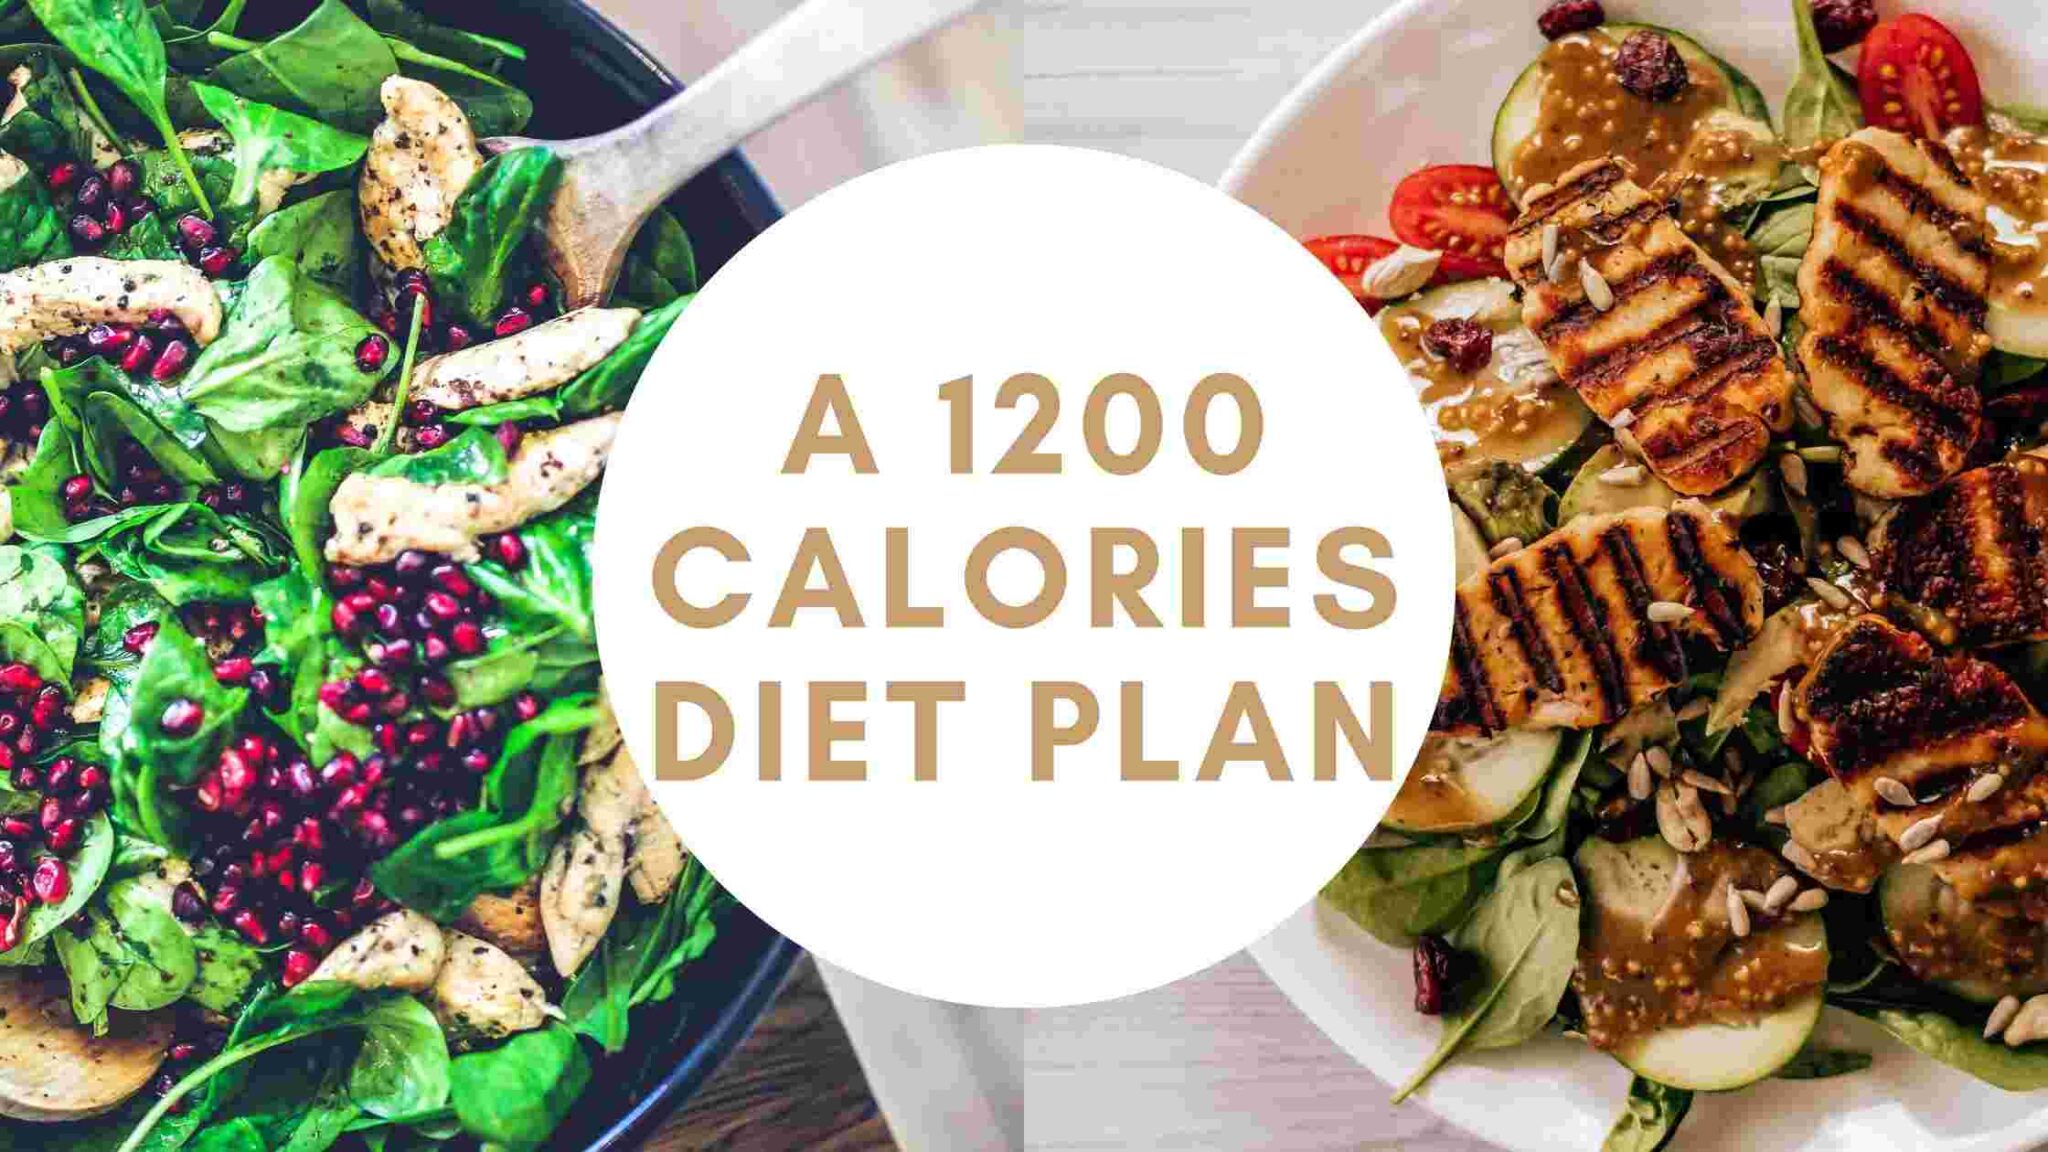 A 1200 Calories Diet Plan For Free | Loaded Health